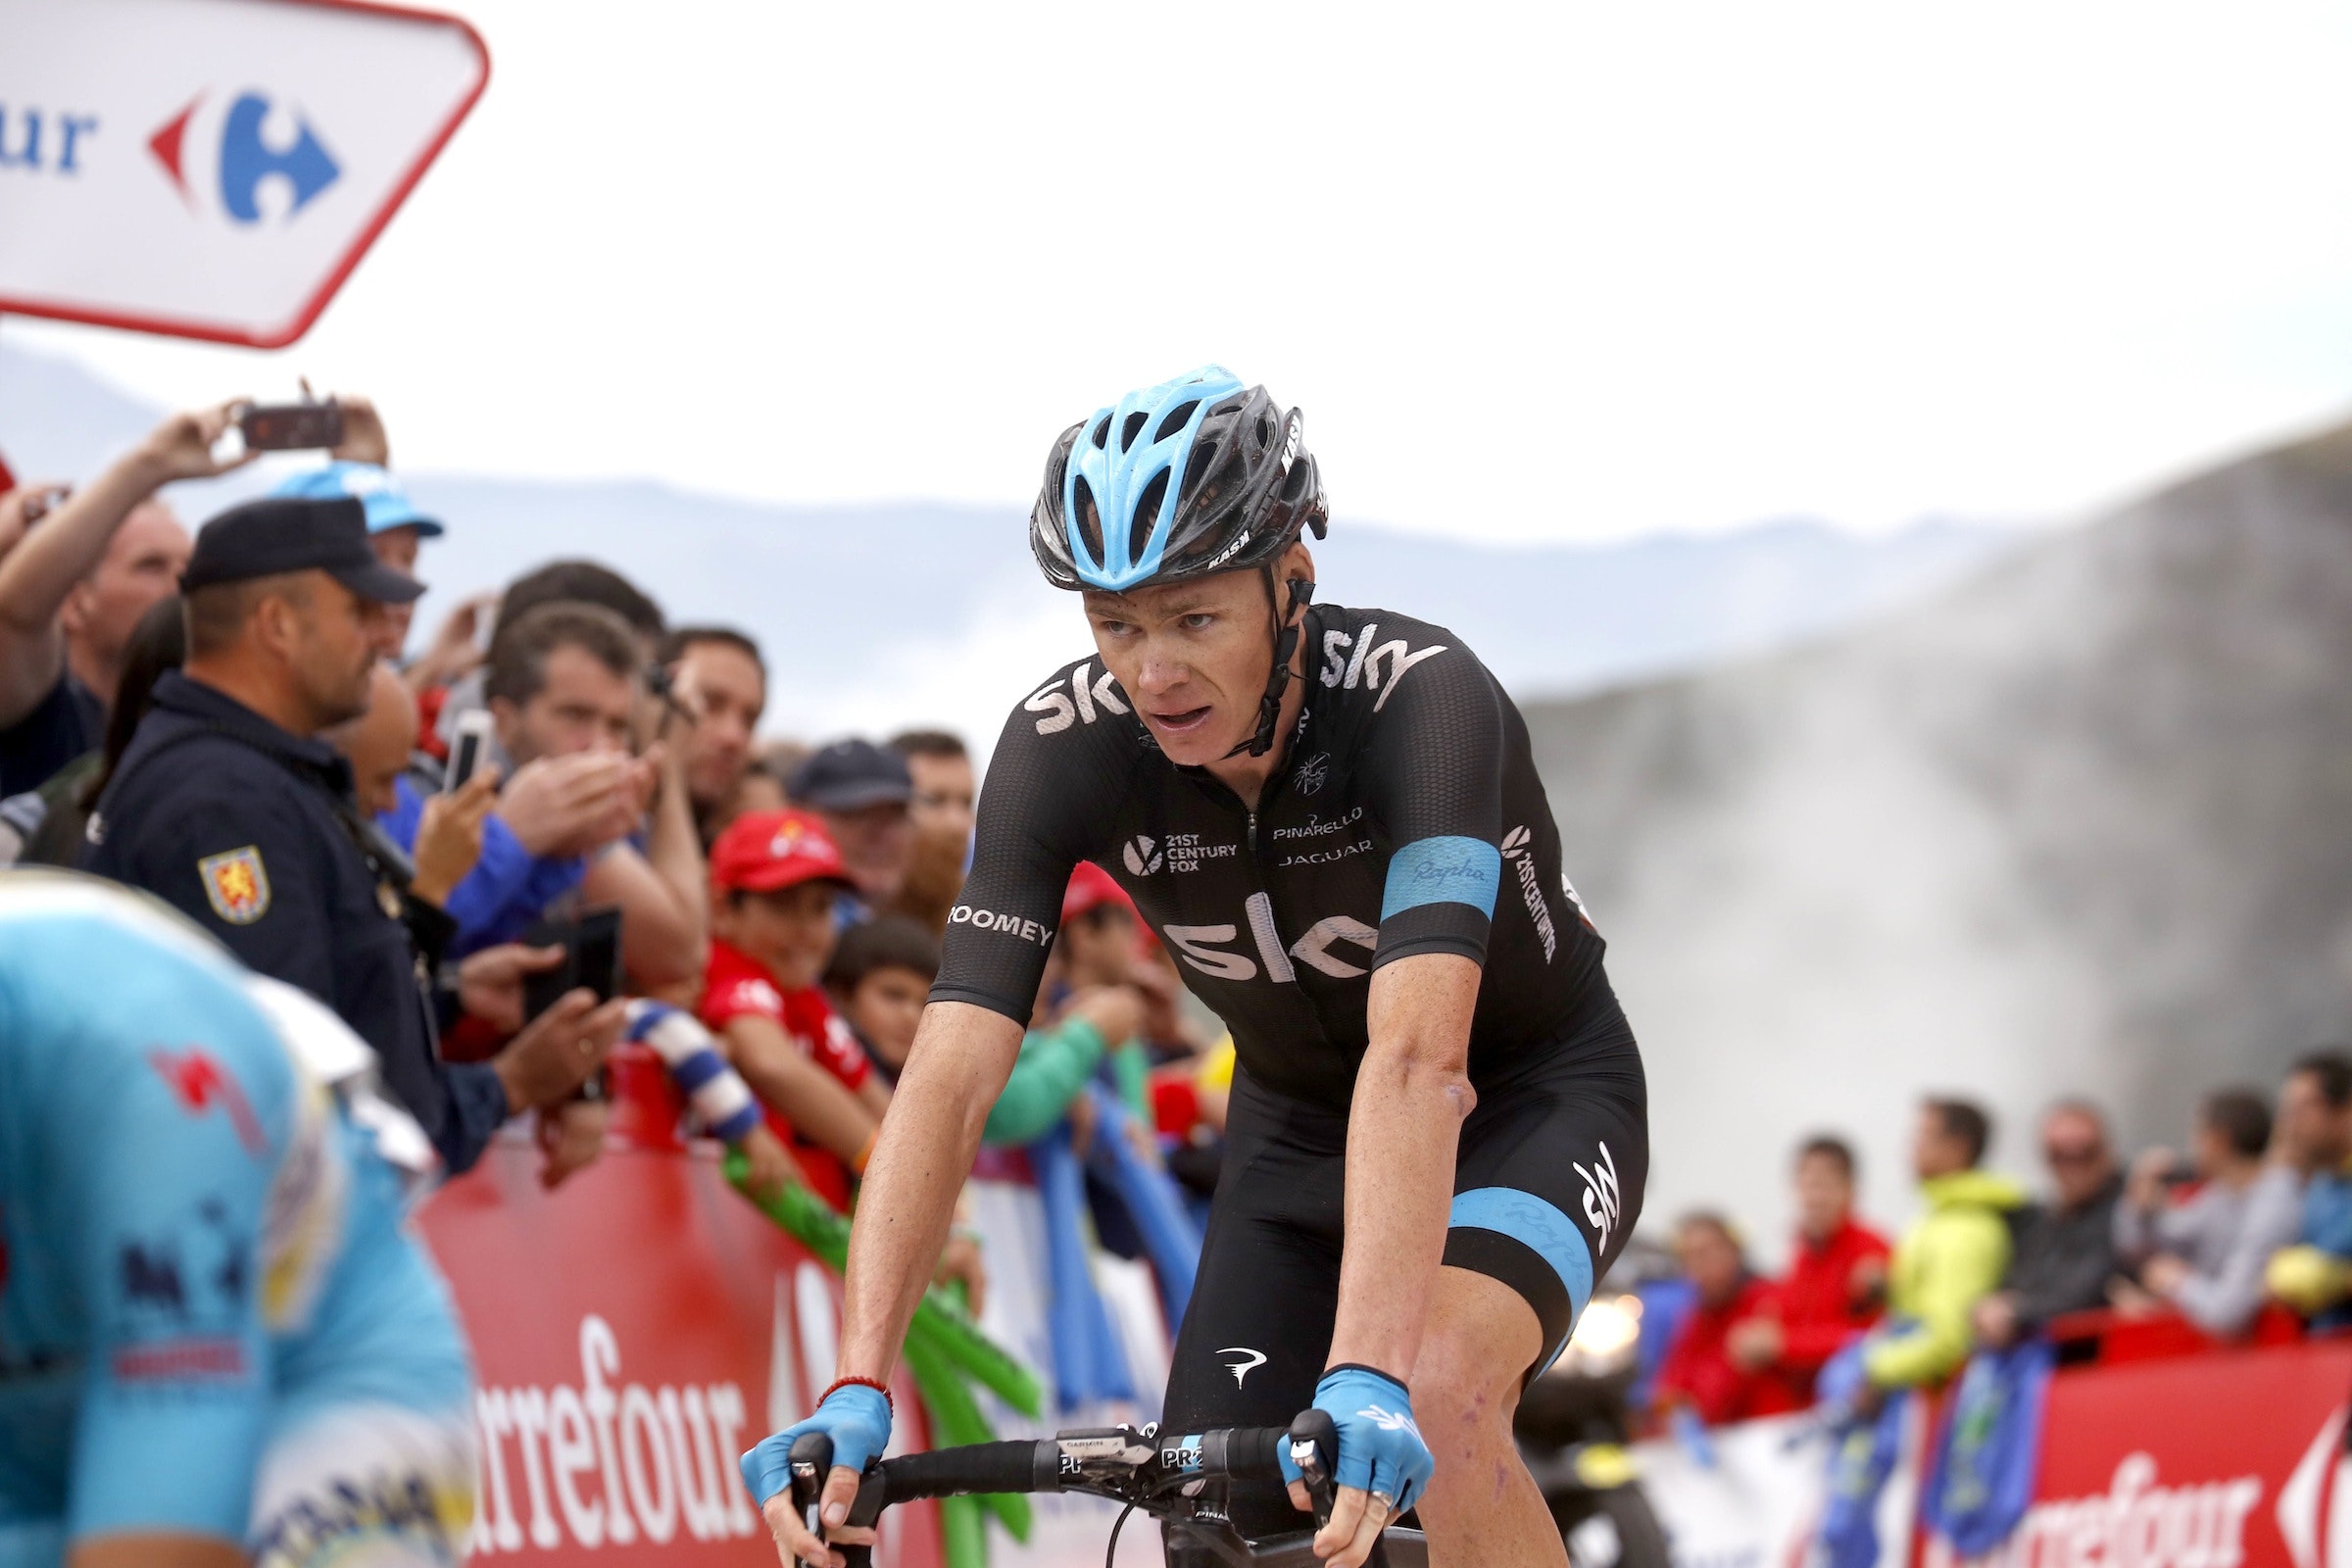 Chris Froome, Vuelta a Espana 2014, stage 15, pic: ©Sirotti